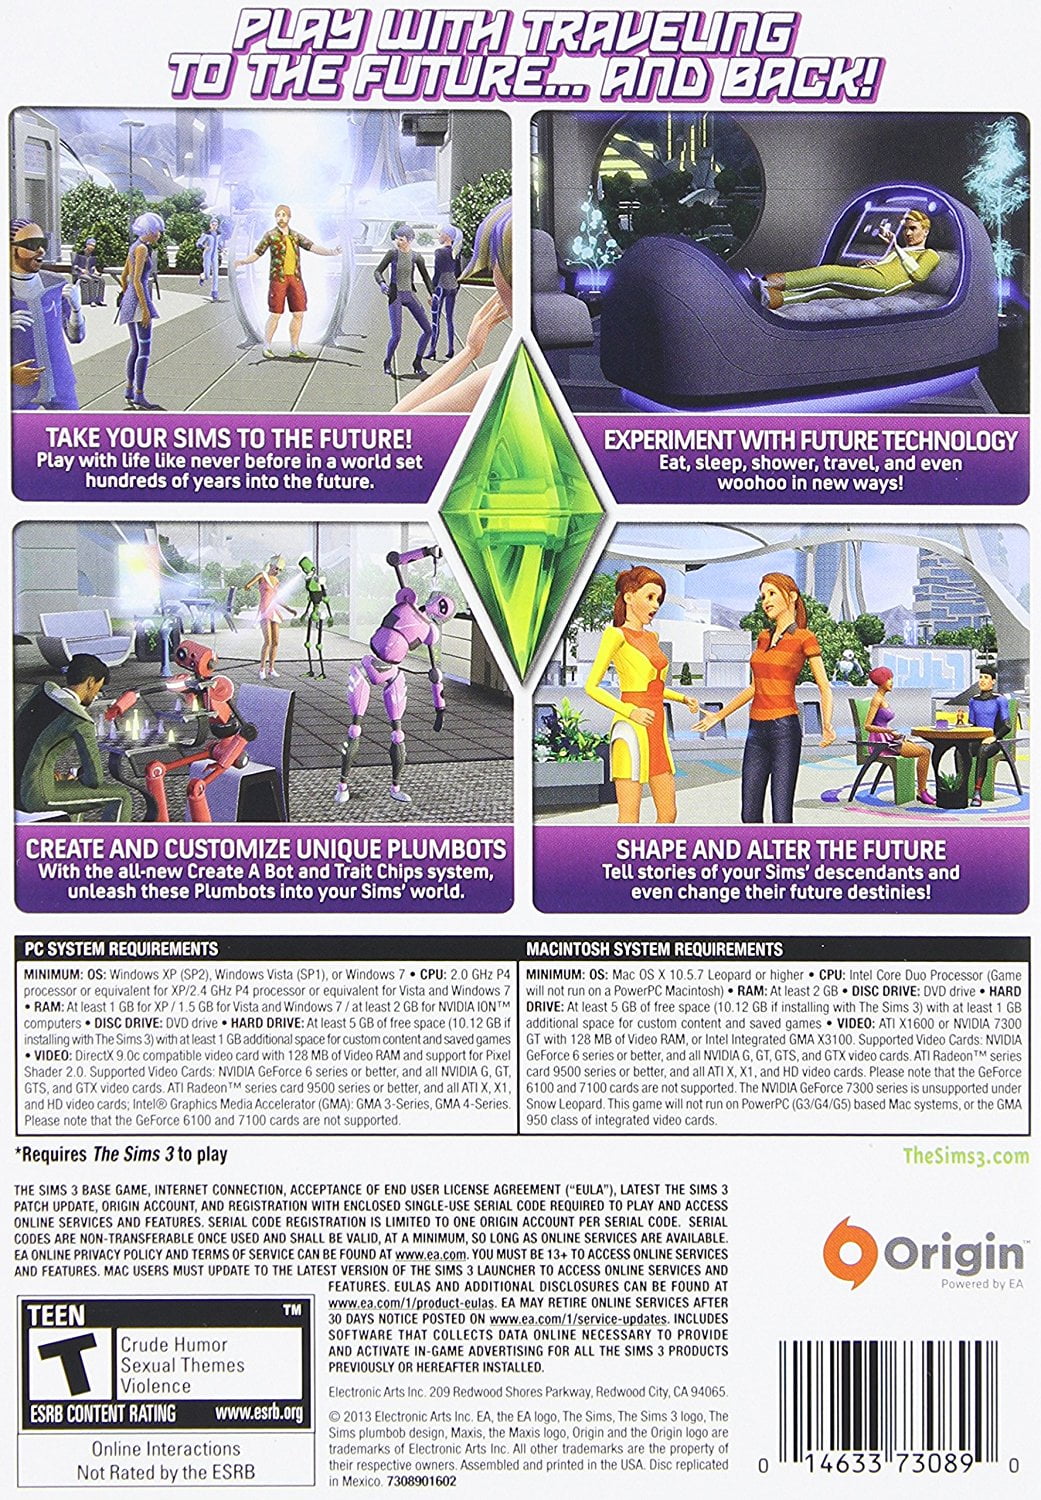 Sims 4 Get Together Expansion Pack PC MAC DVD-ROM Origin Maxis EA Rated T  Teen